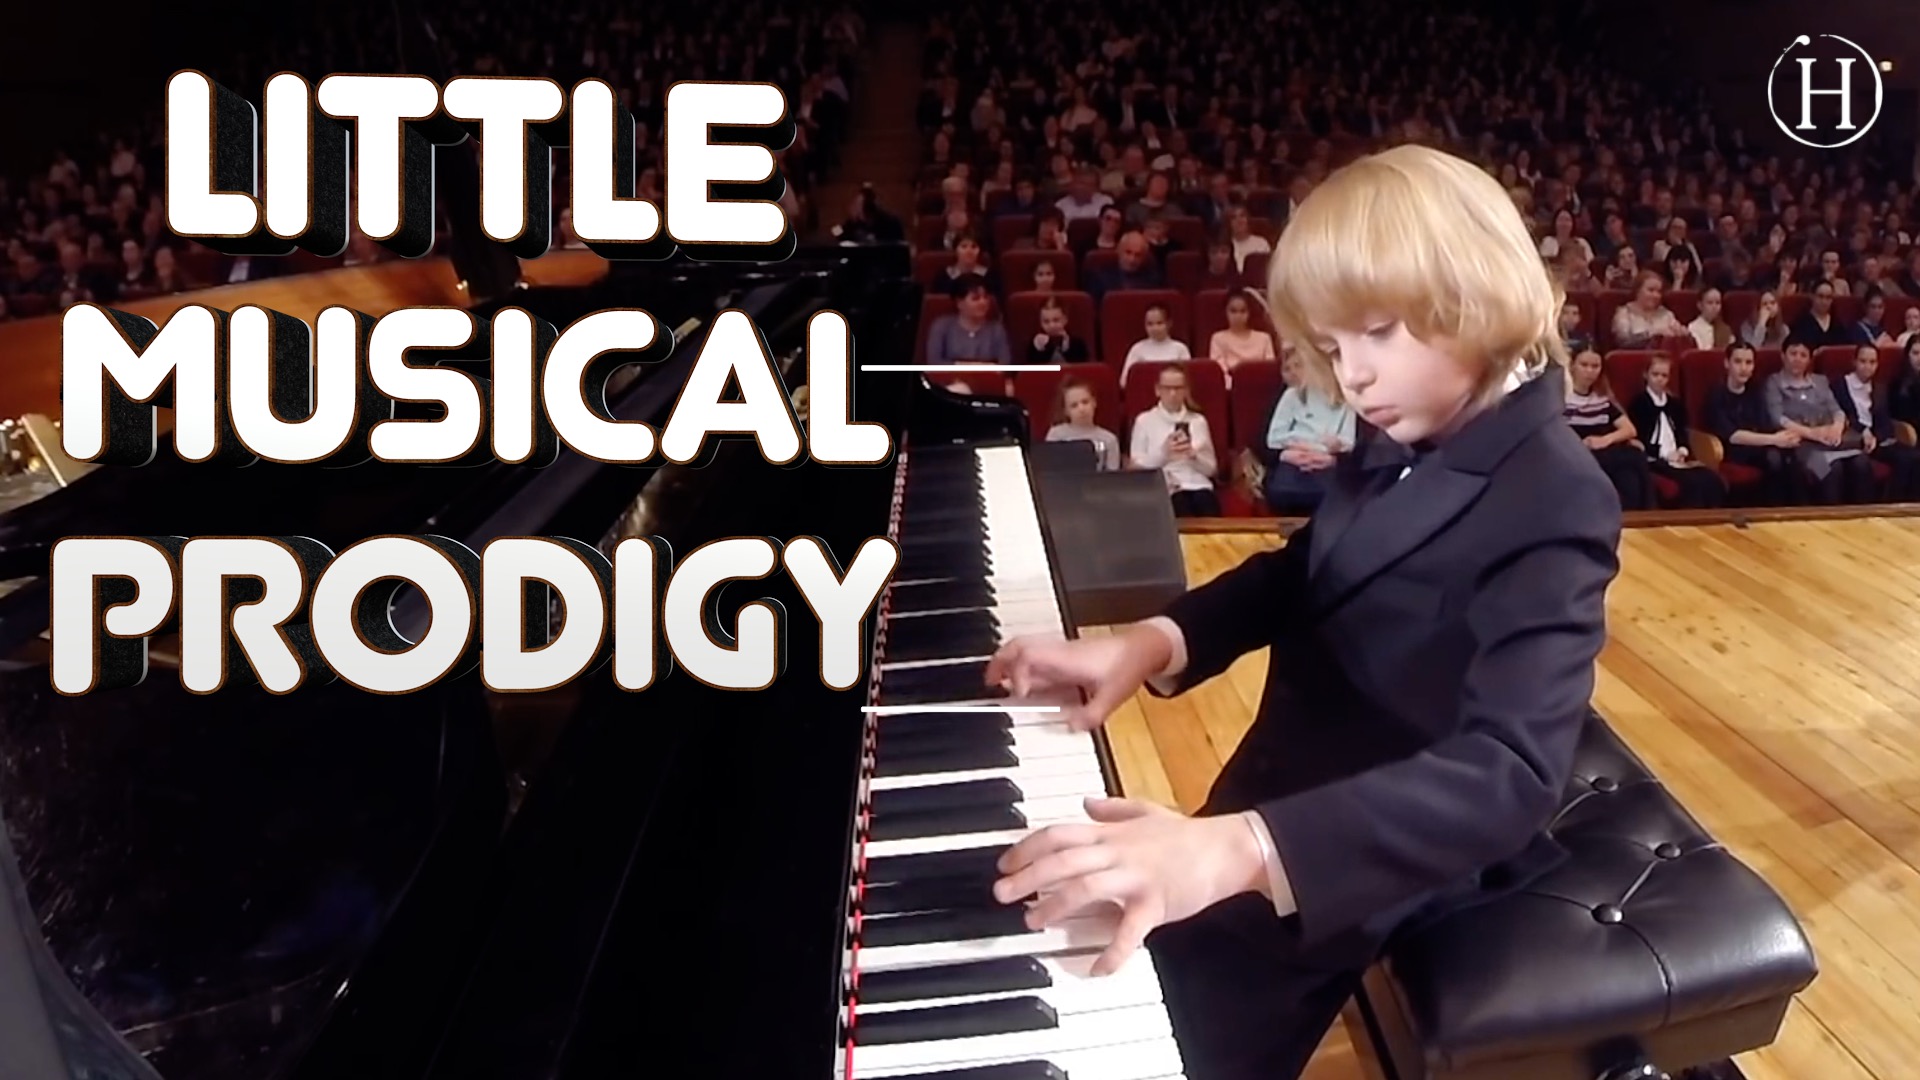 A Little Musical Prodigy | Humanity Life